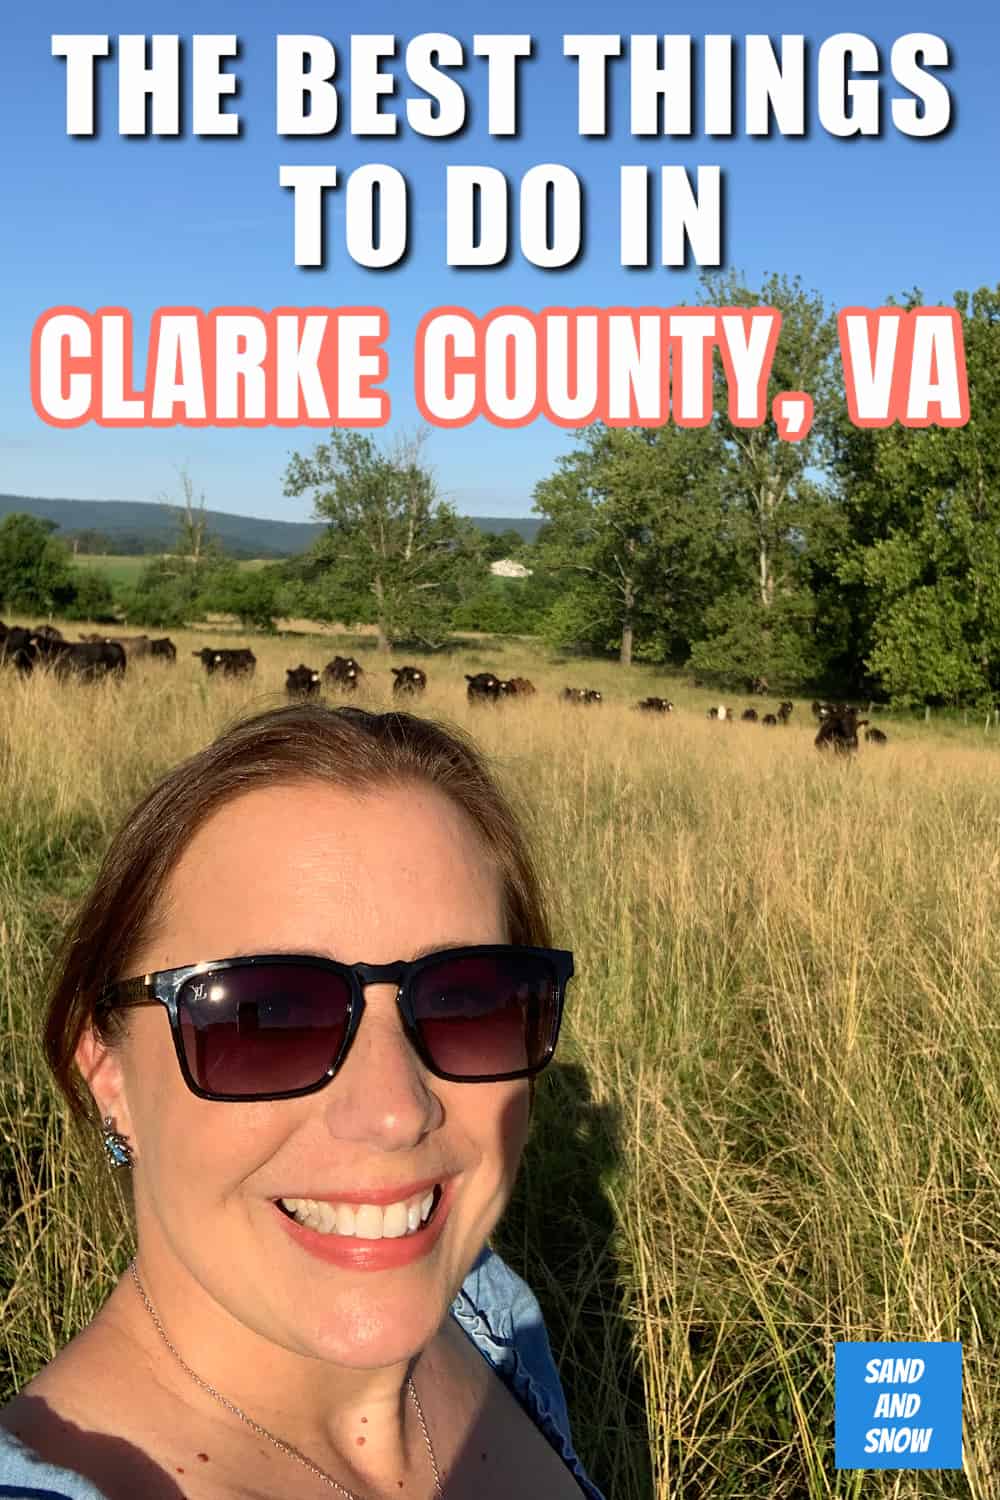 If you're heading to Clarke County, VA, and want the scoop on its fun activities, here's a list of the best things to do in Clarke County, VA! 